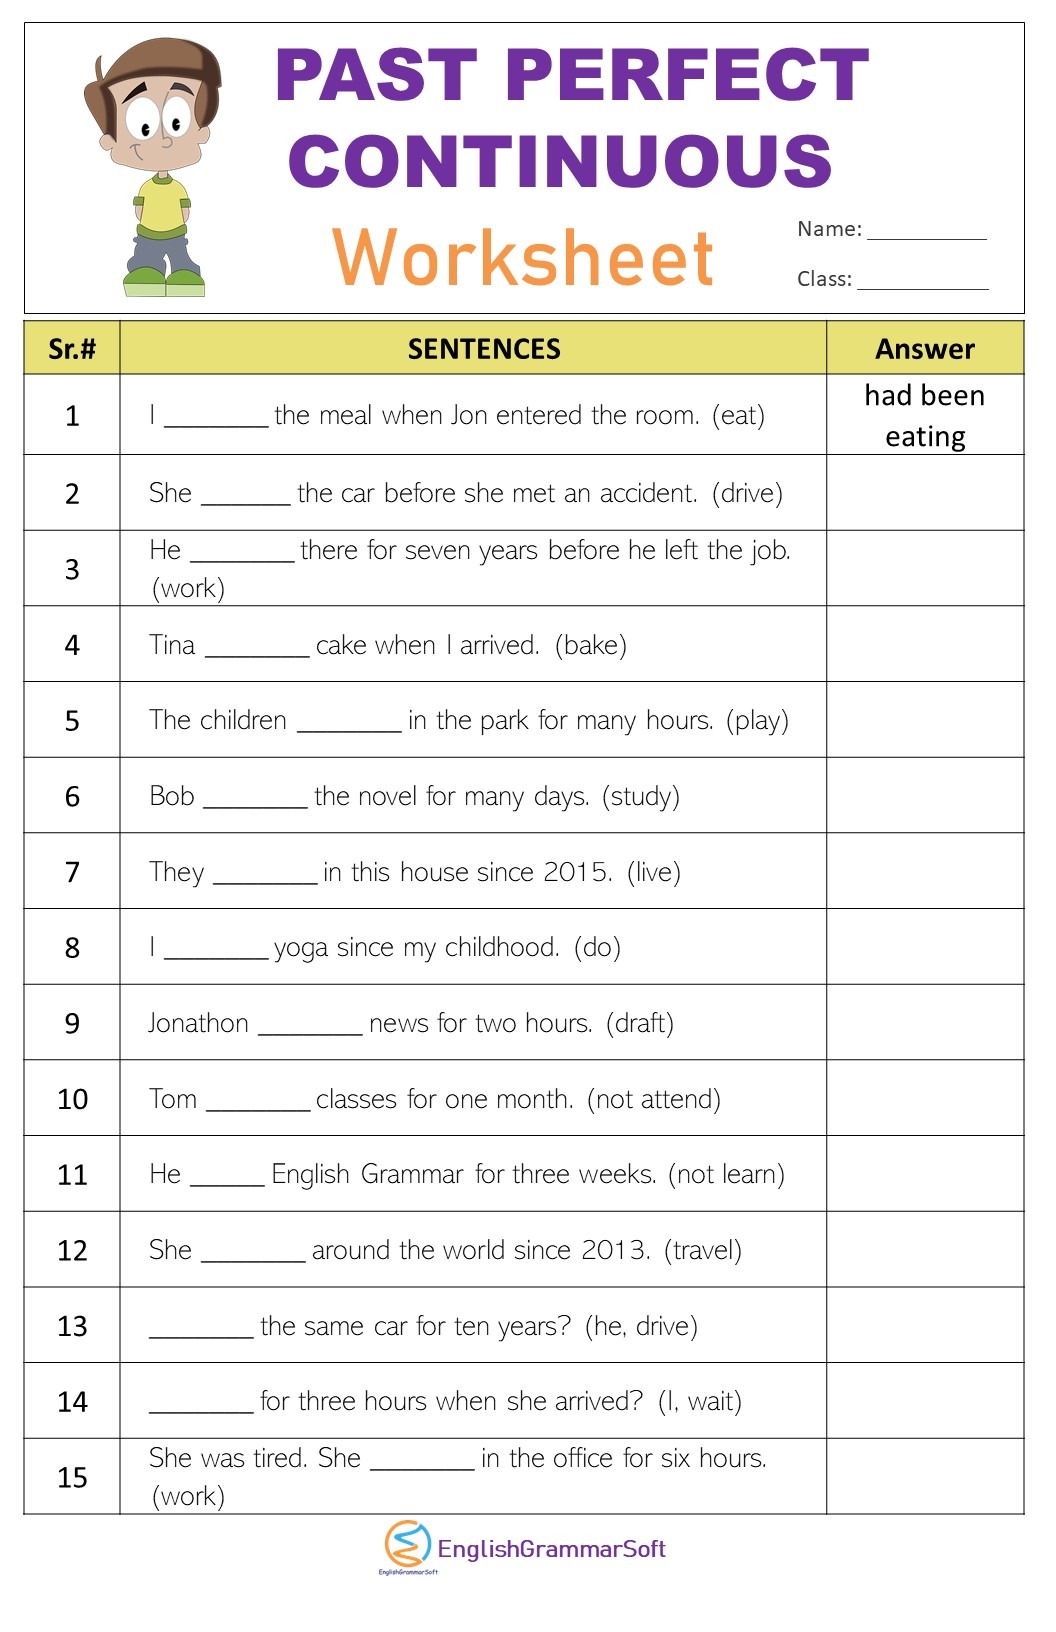 Past Perfect Continuous Tense Worksheet with Answers